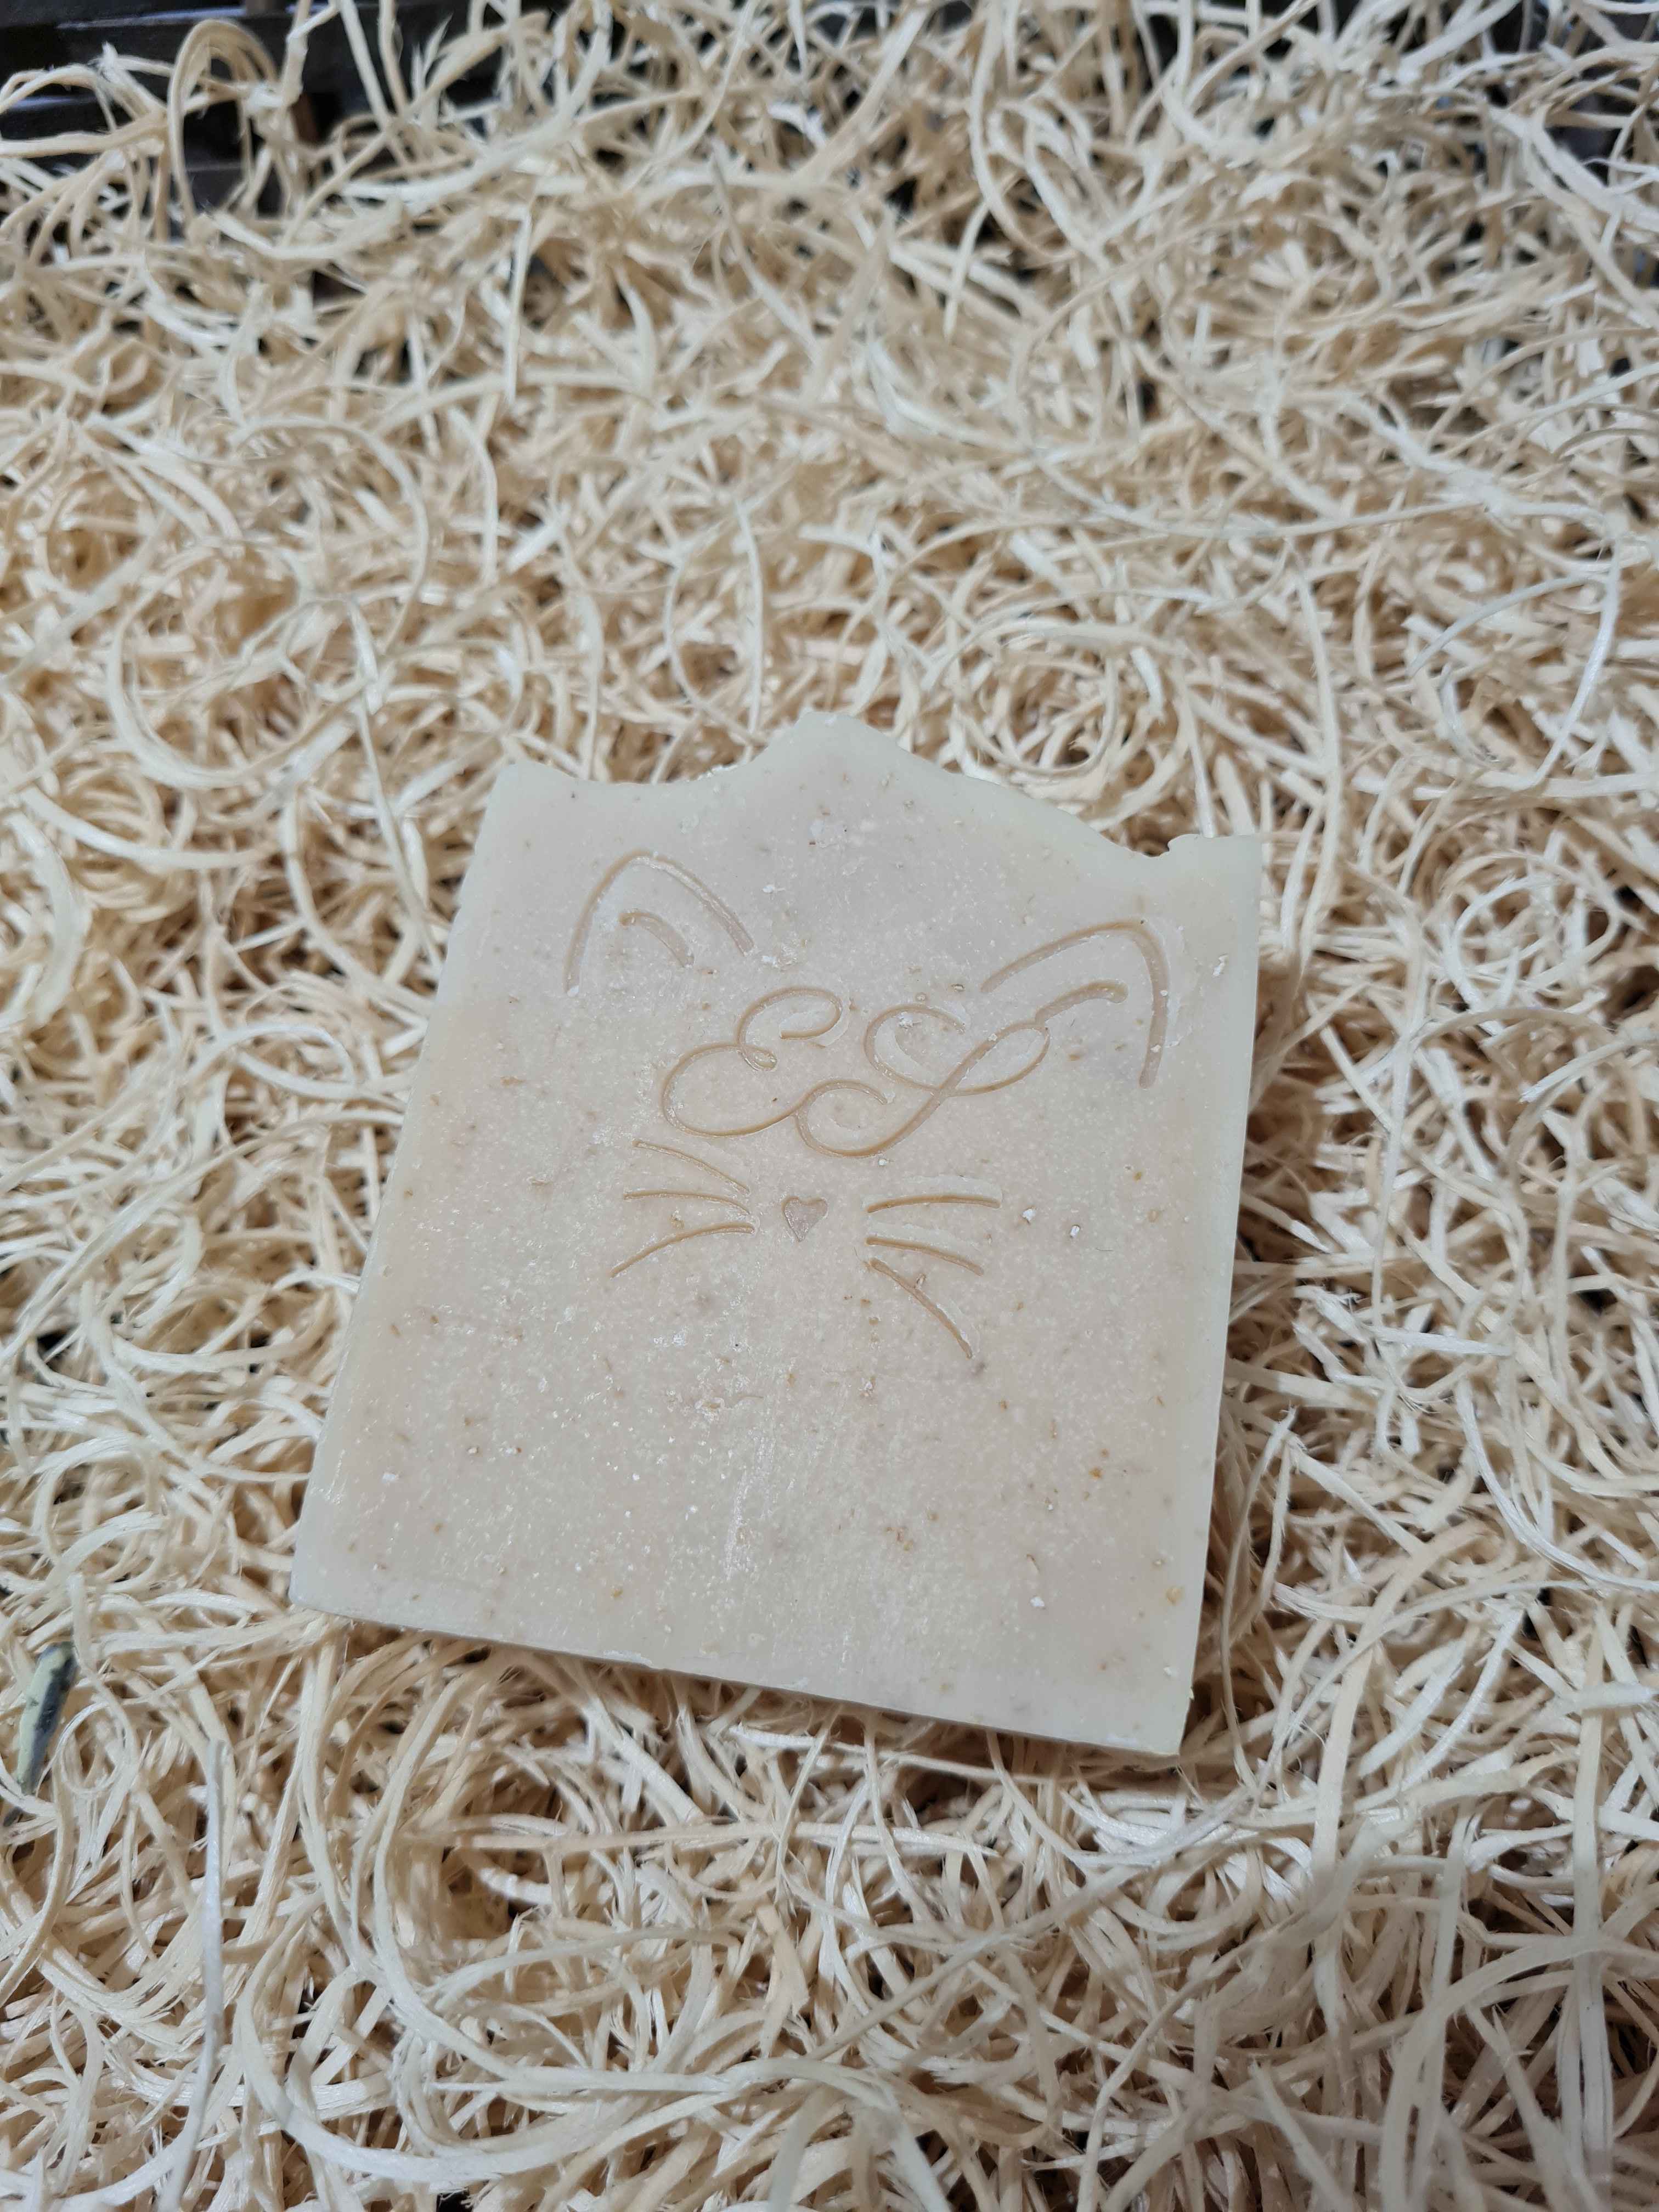 Goat's milk soap, unscented with oatmeal, honey and beeswax. 